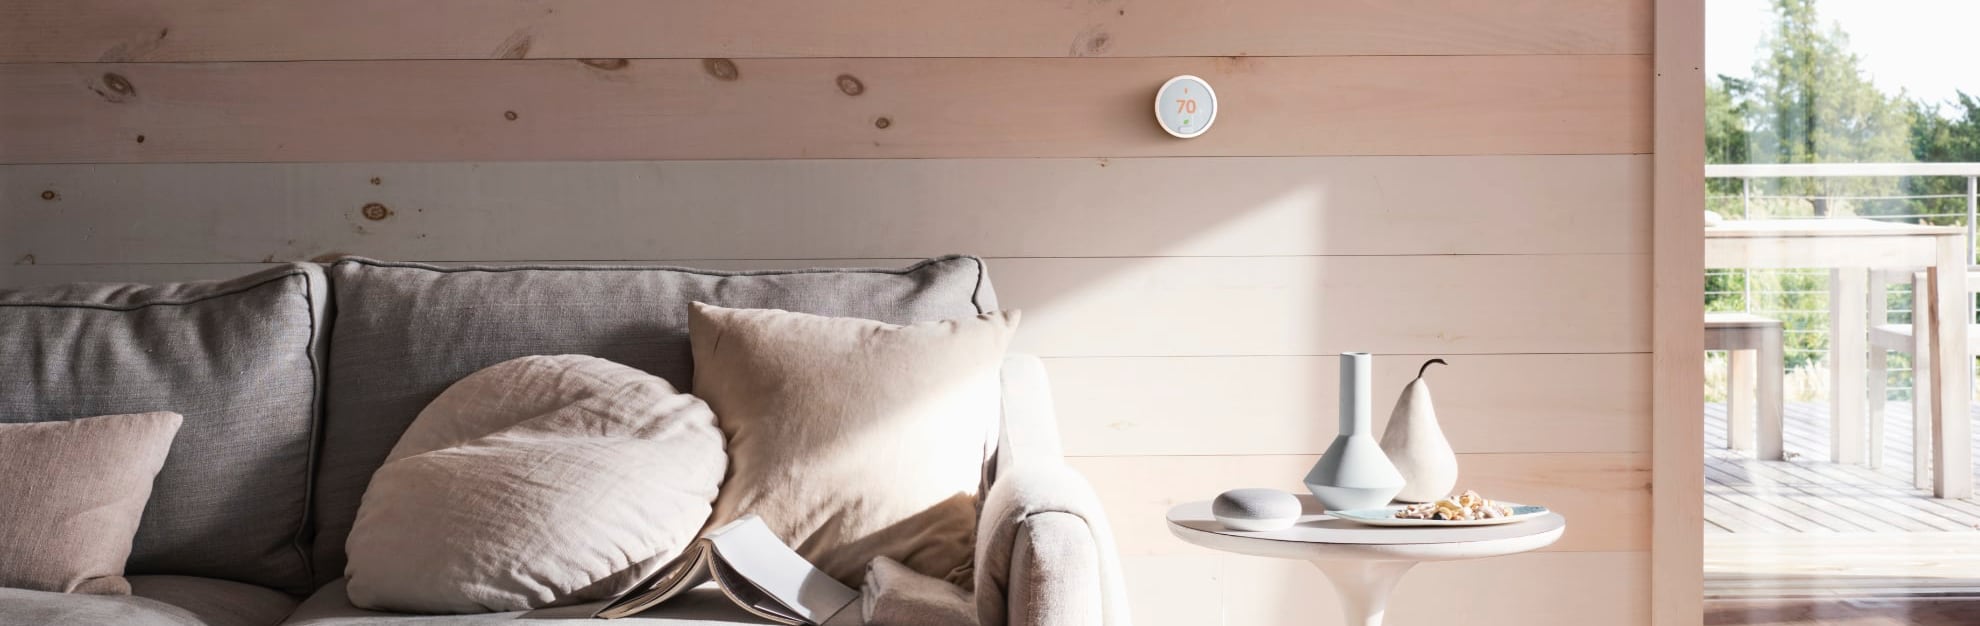 Vivint Home Automation in Amarillo